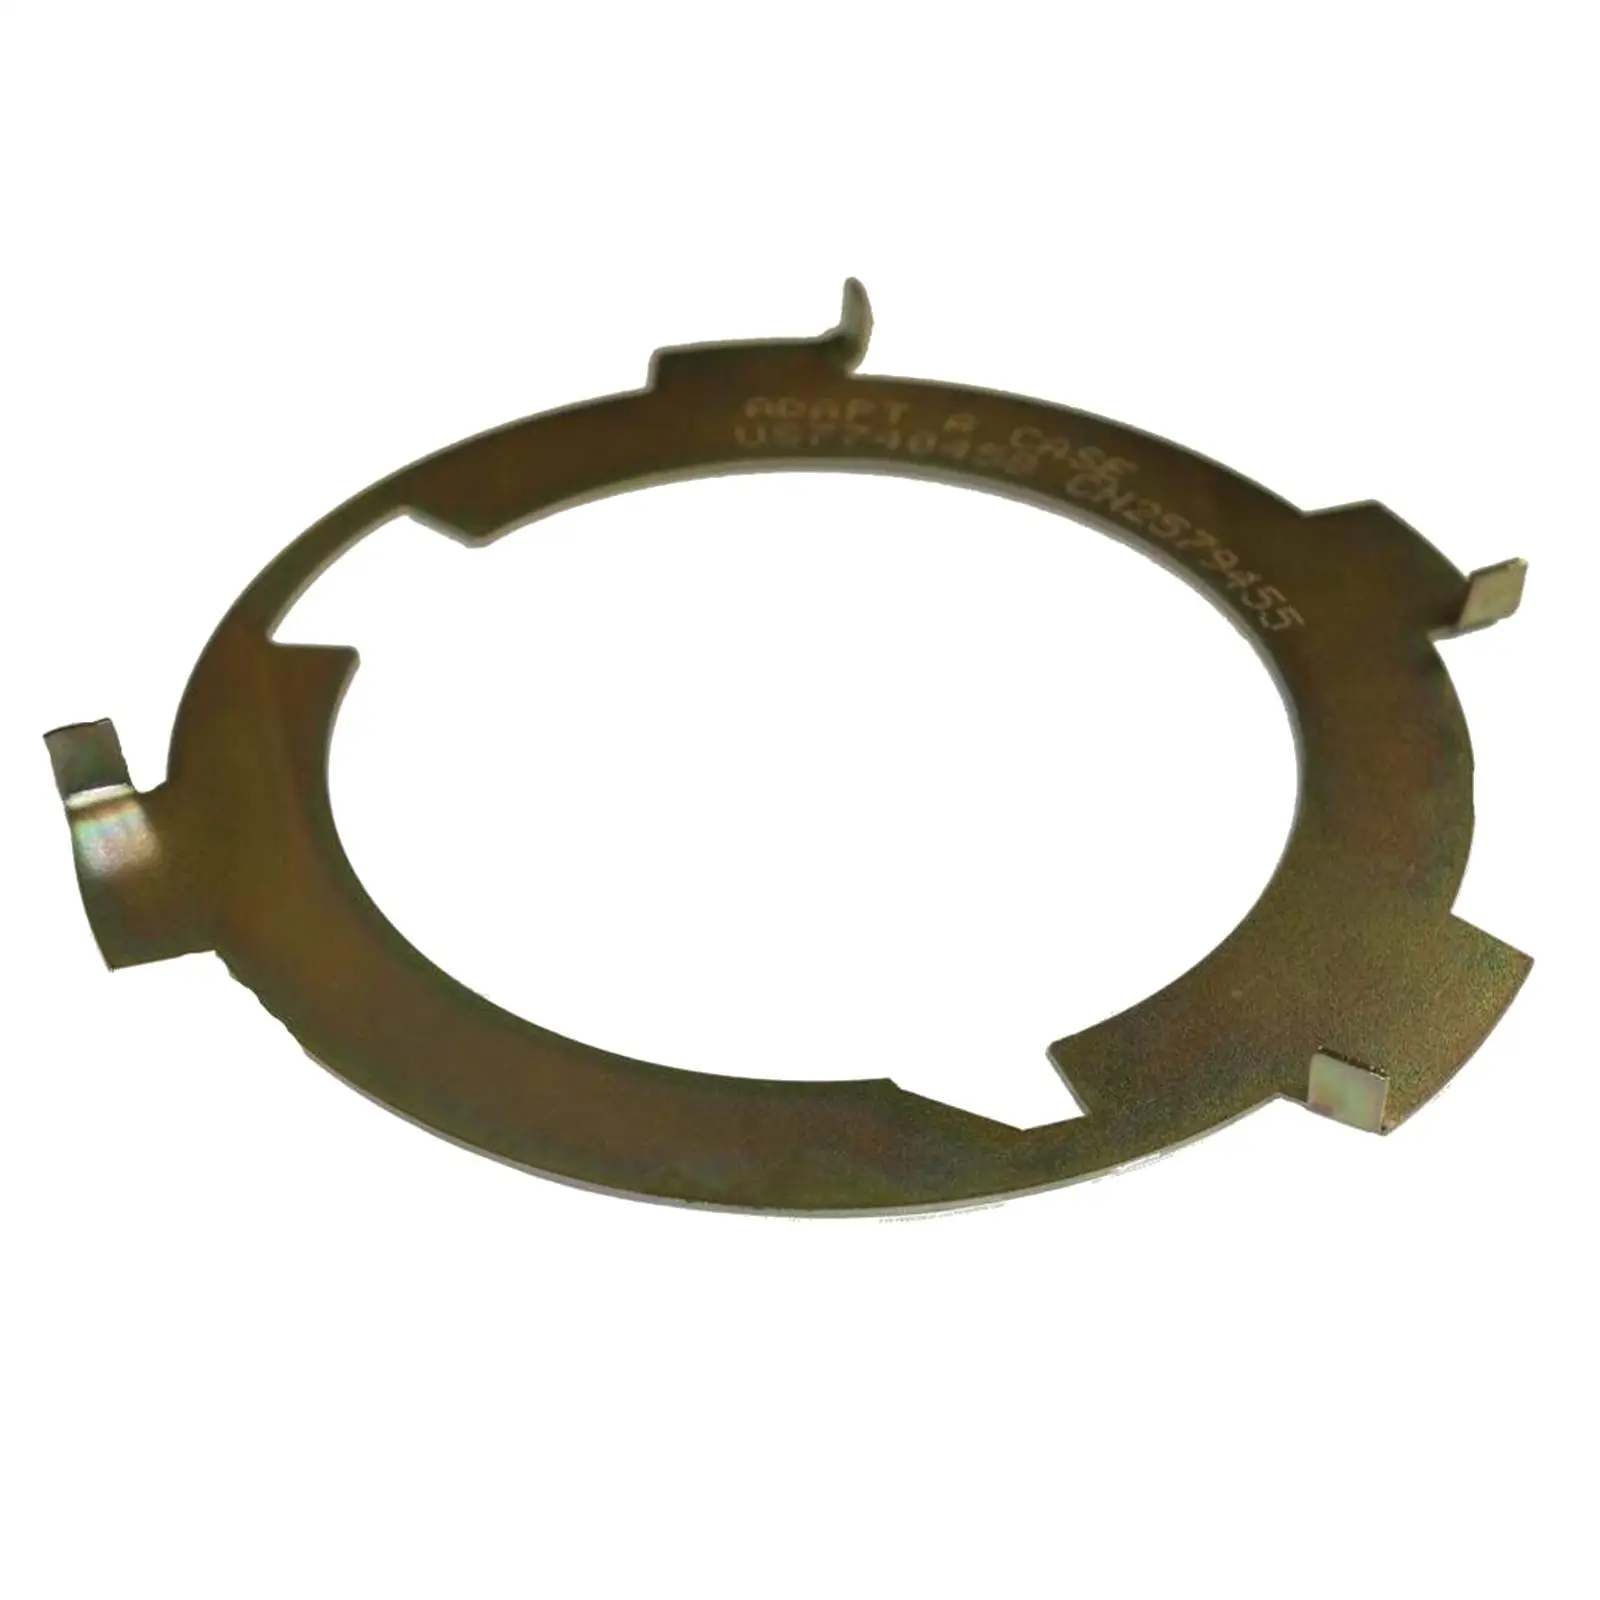 Car Transfer Case Oil , BRNY4080, 482460, Oil  Plate Gasket Fit for GM NP136 NP236 NP246 NP261HD NP263HD 1998-2007 Metal